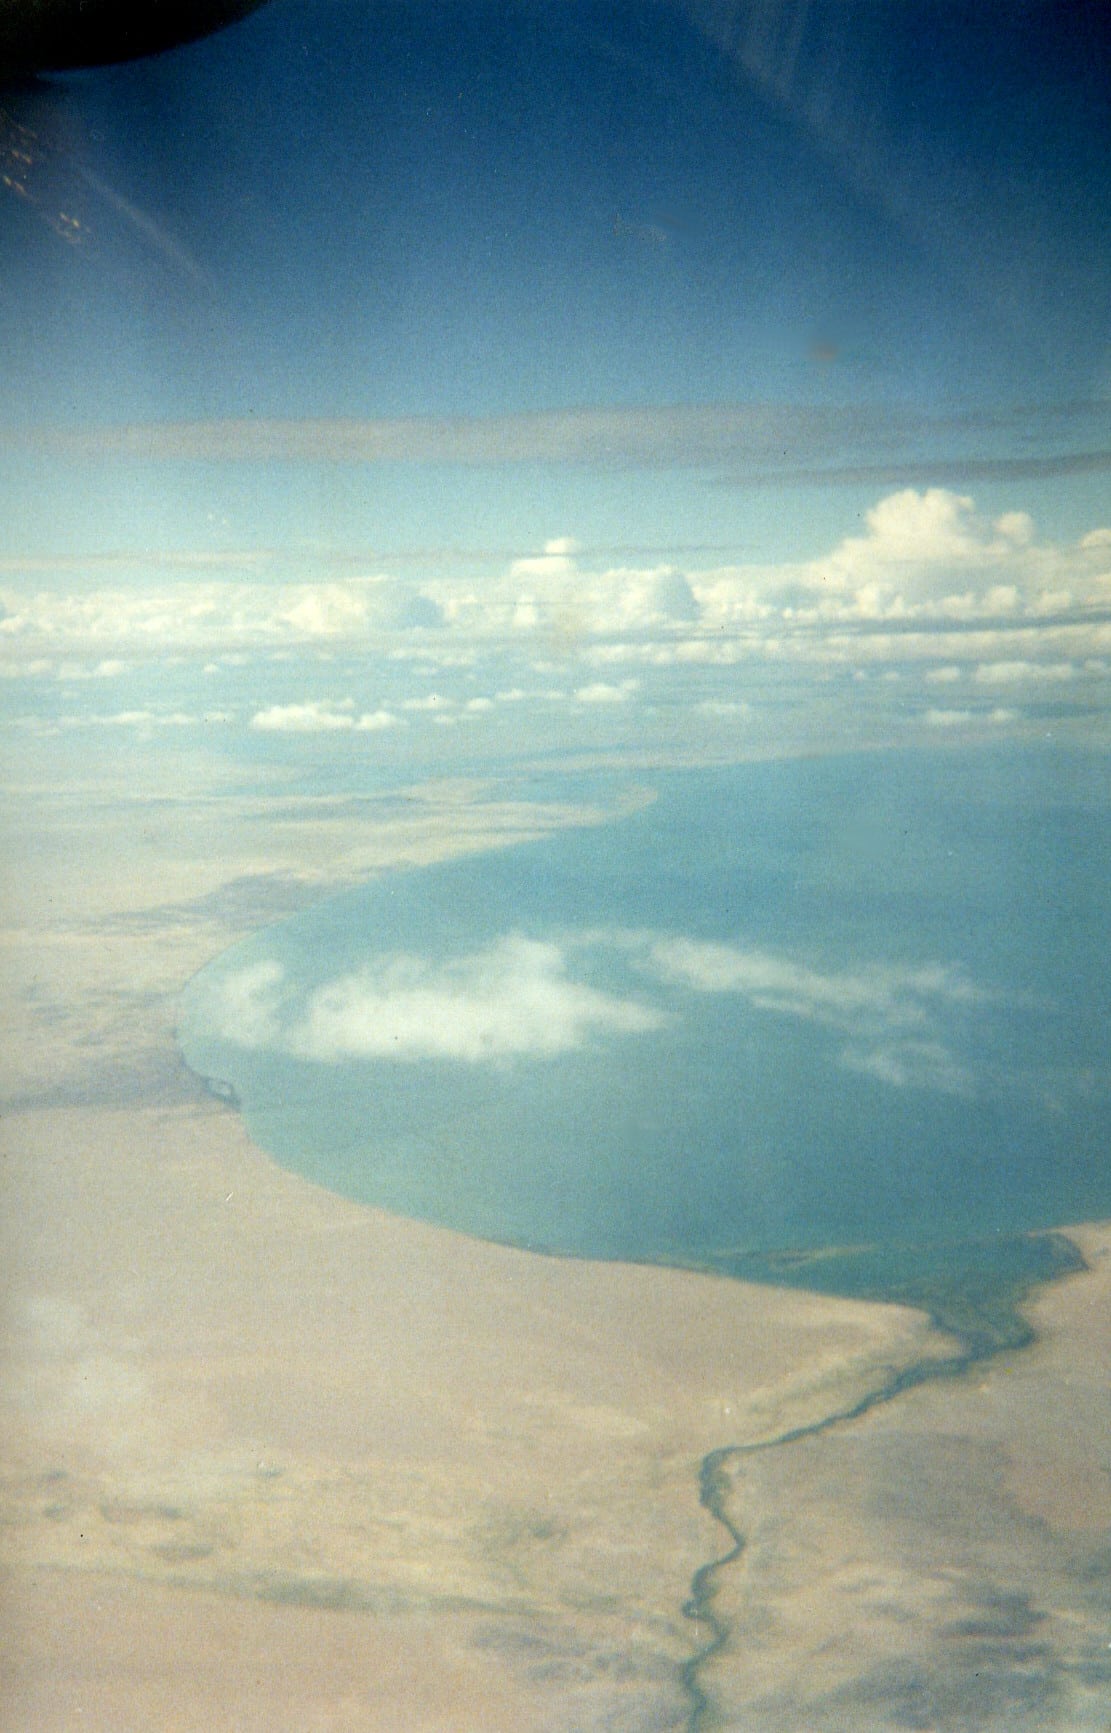 Khar Us Nuur from the Miat Plane